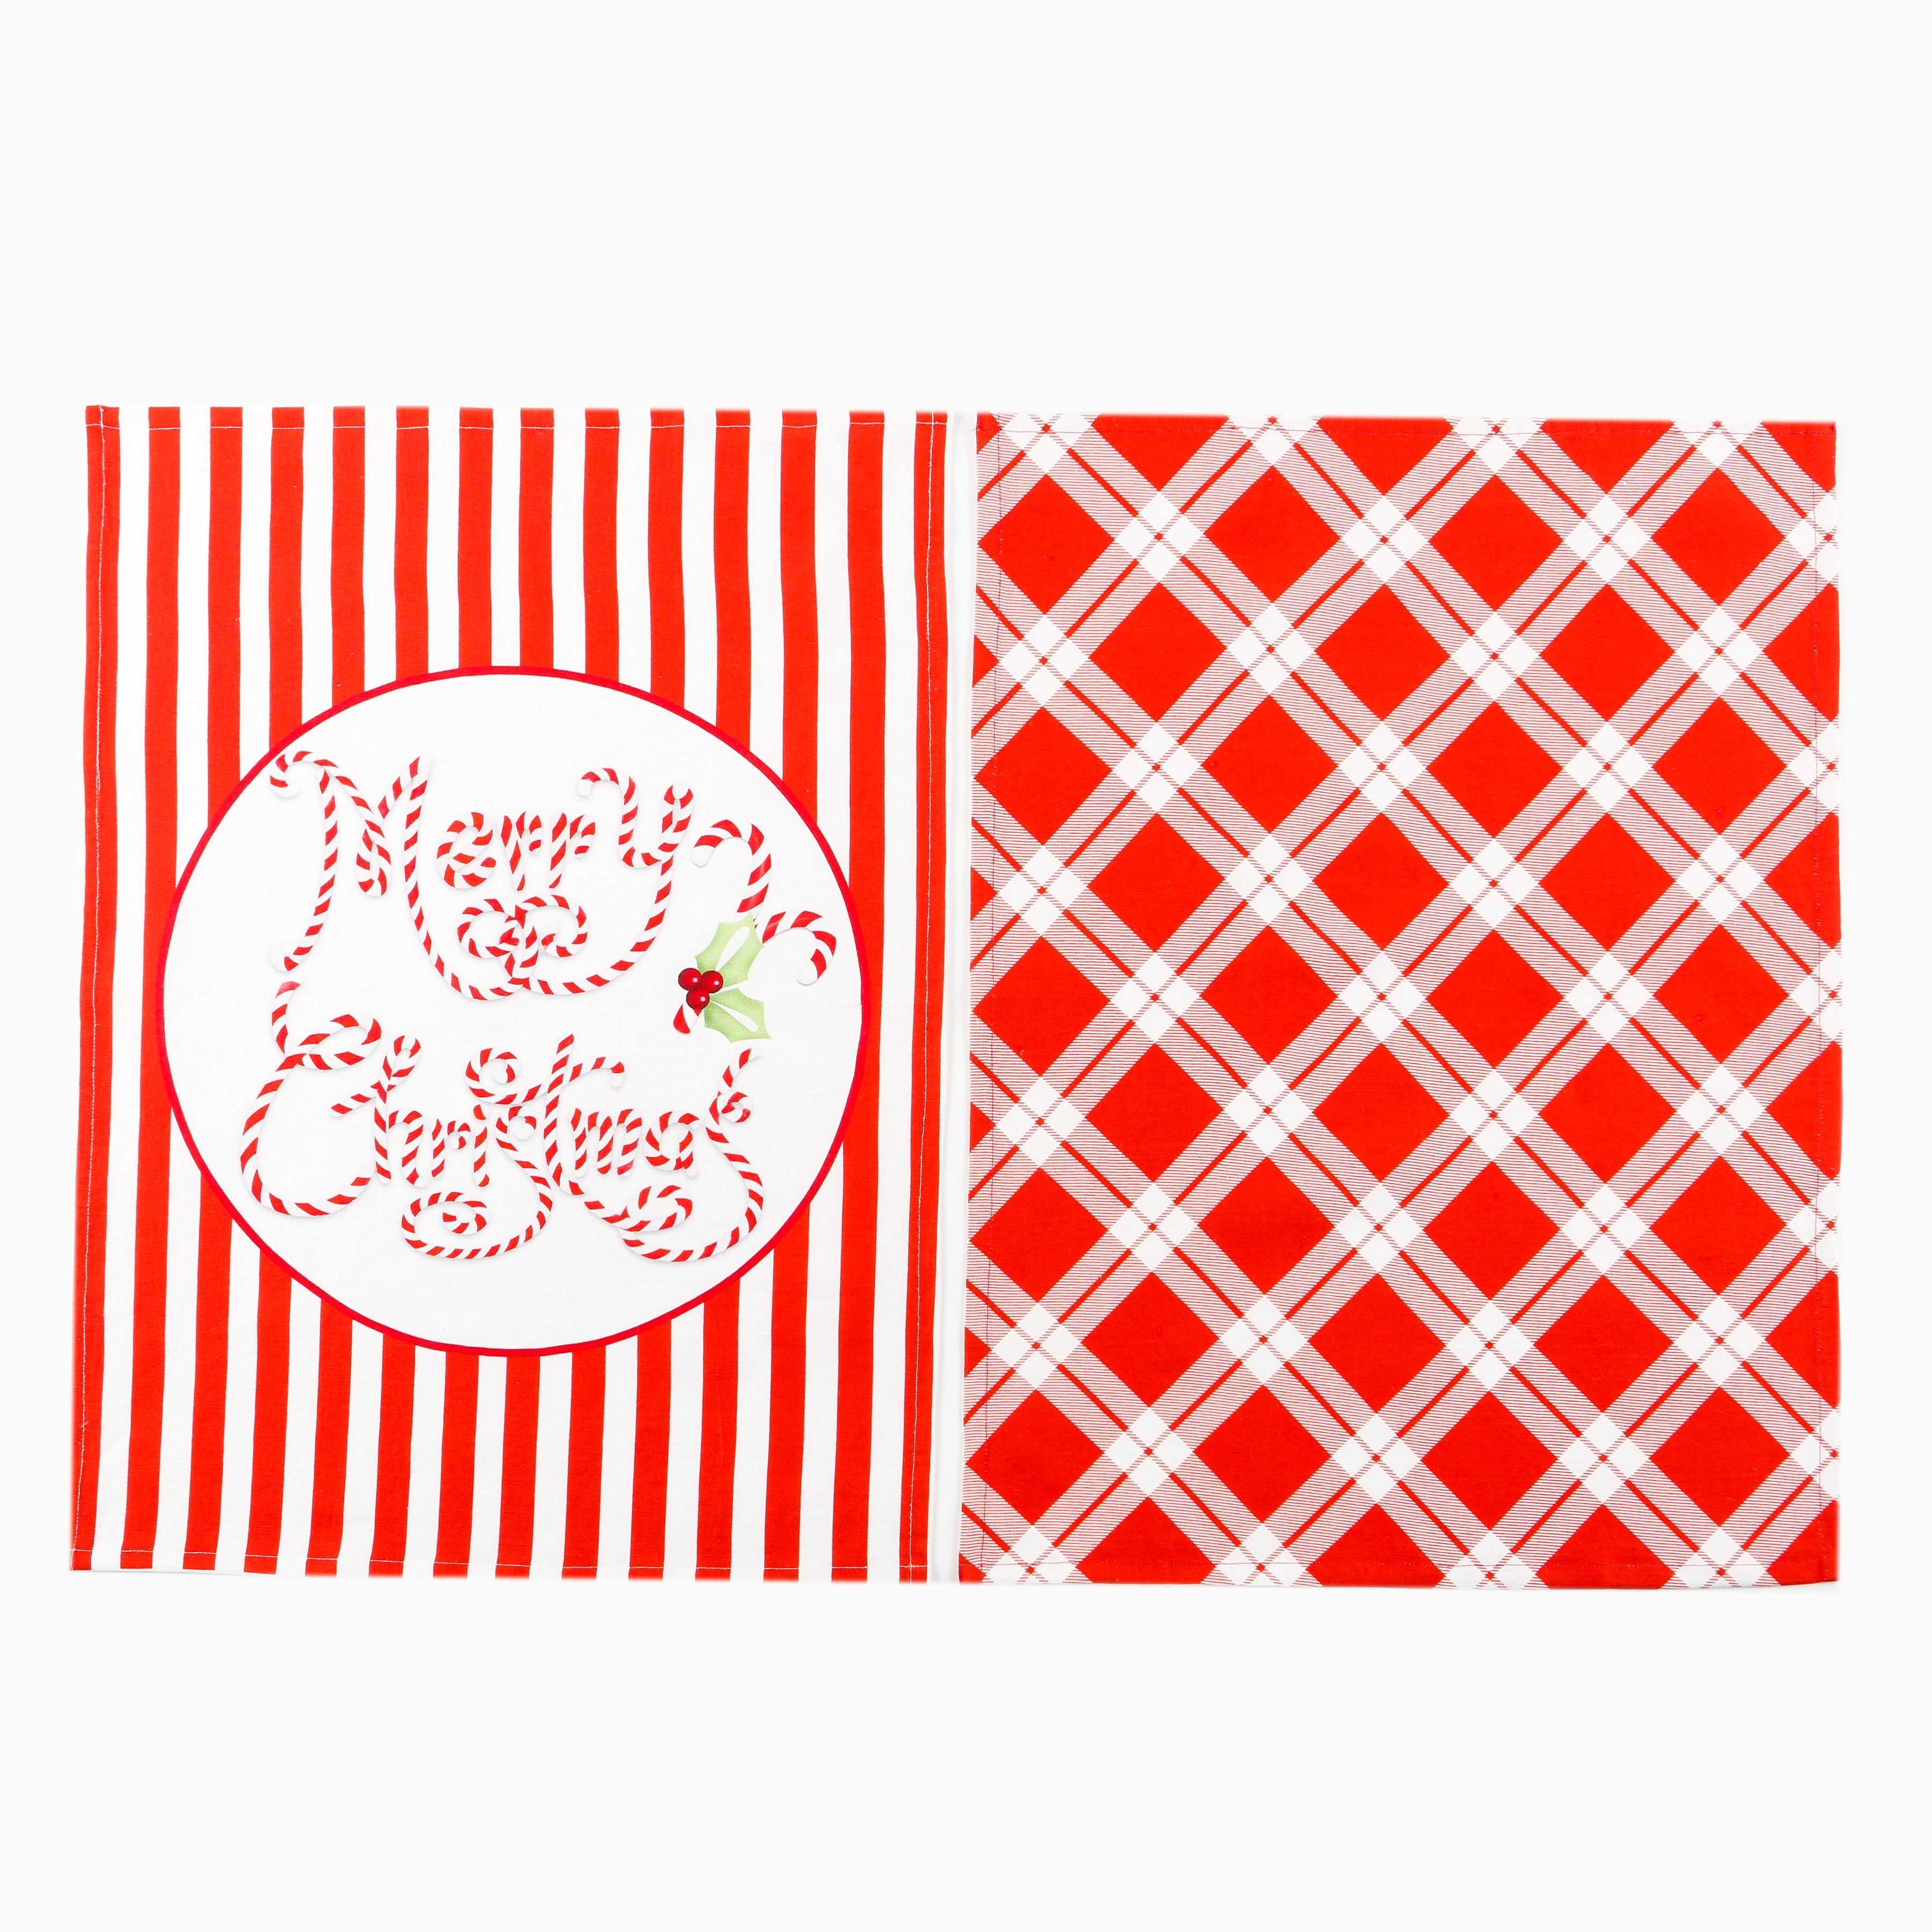 Naughty and Nice Plaid Kitchen Towels, Set of 2